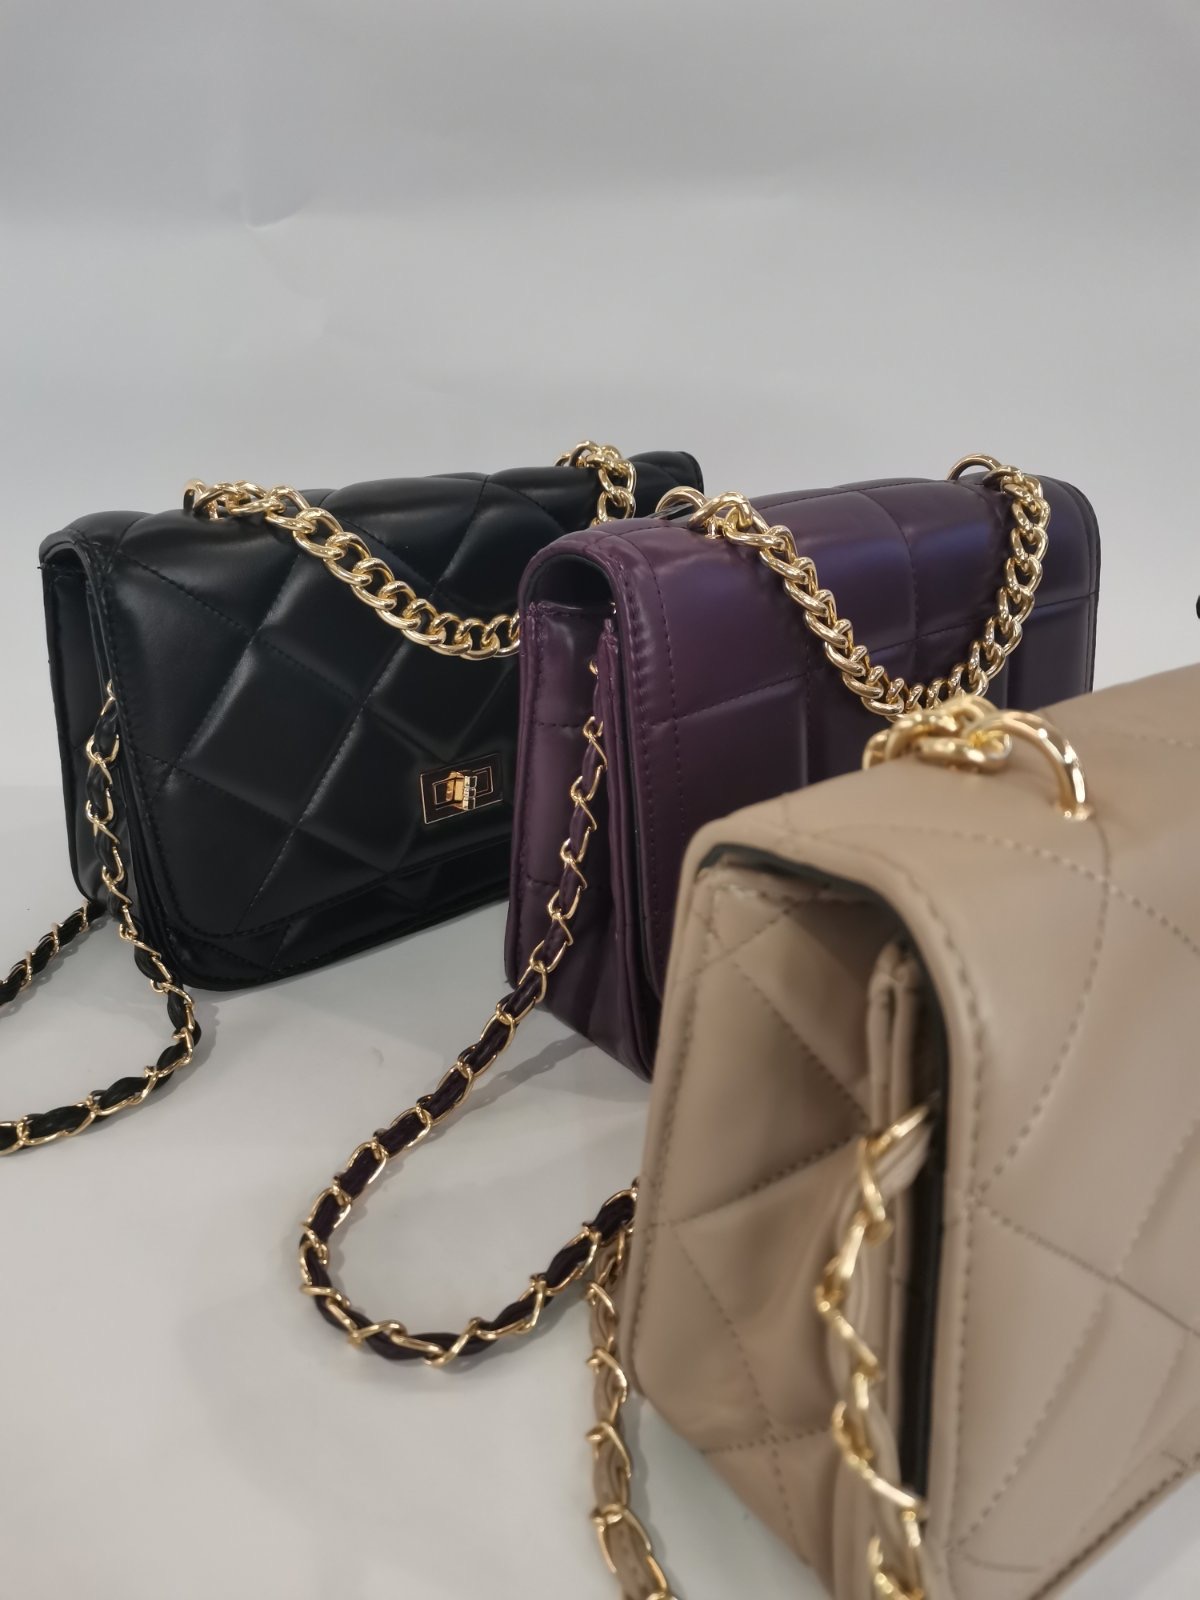 three Shoulder bags with Chain in three colors